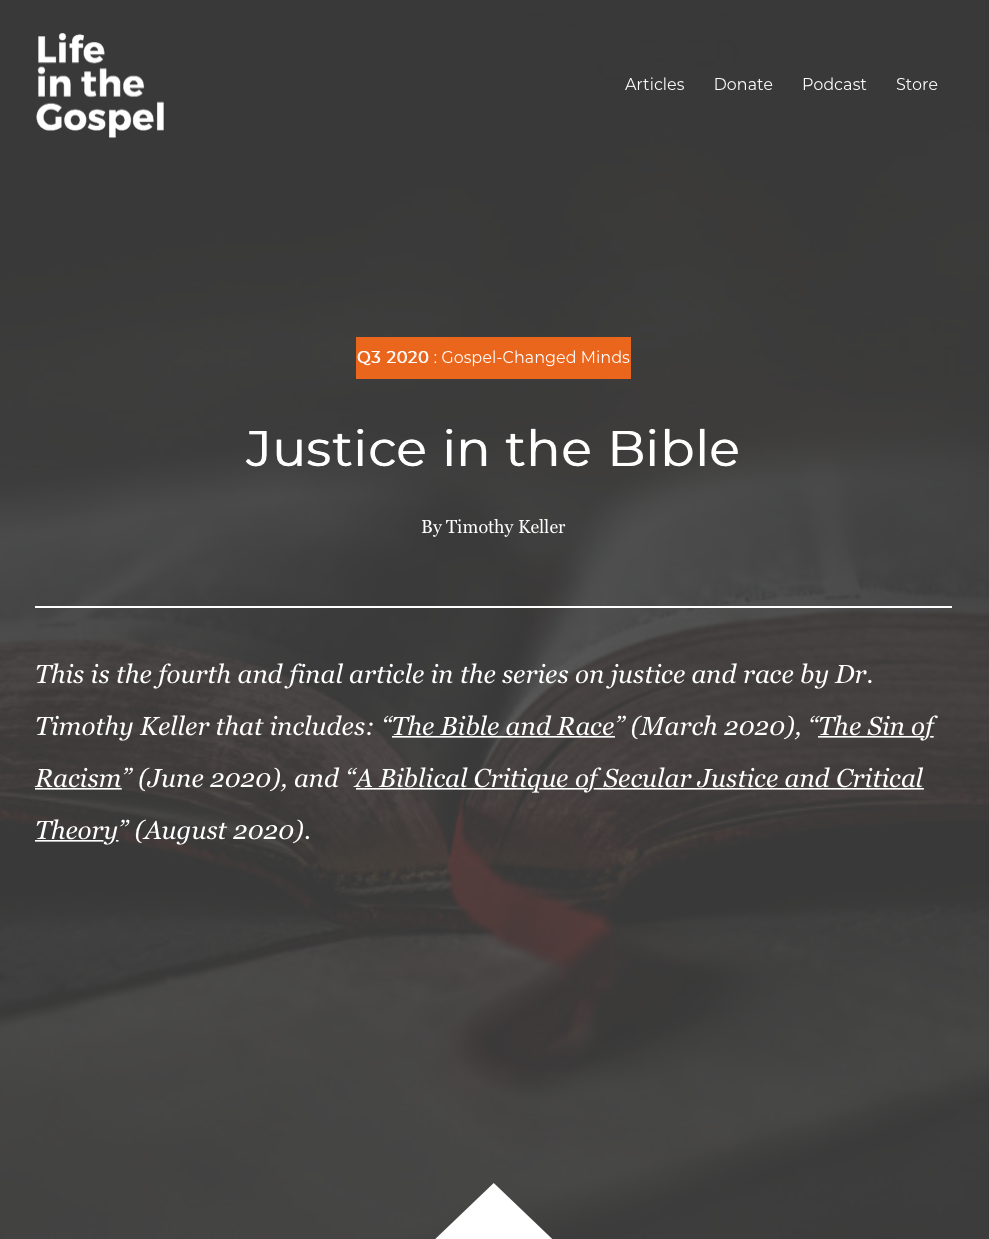 Justice in the Bible by Timothy Keller